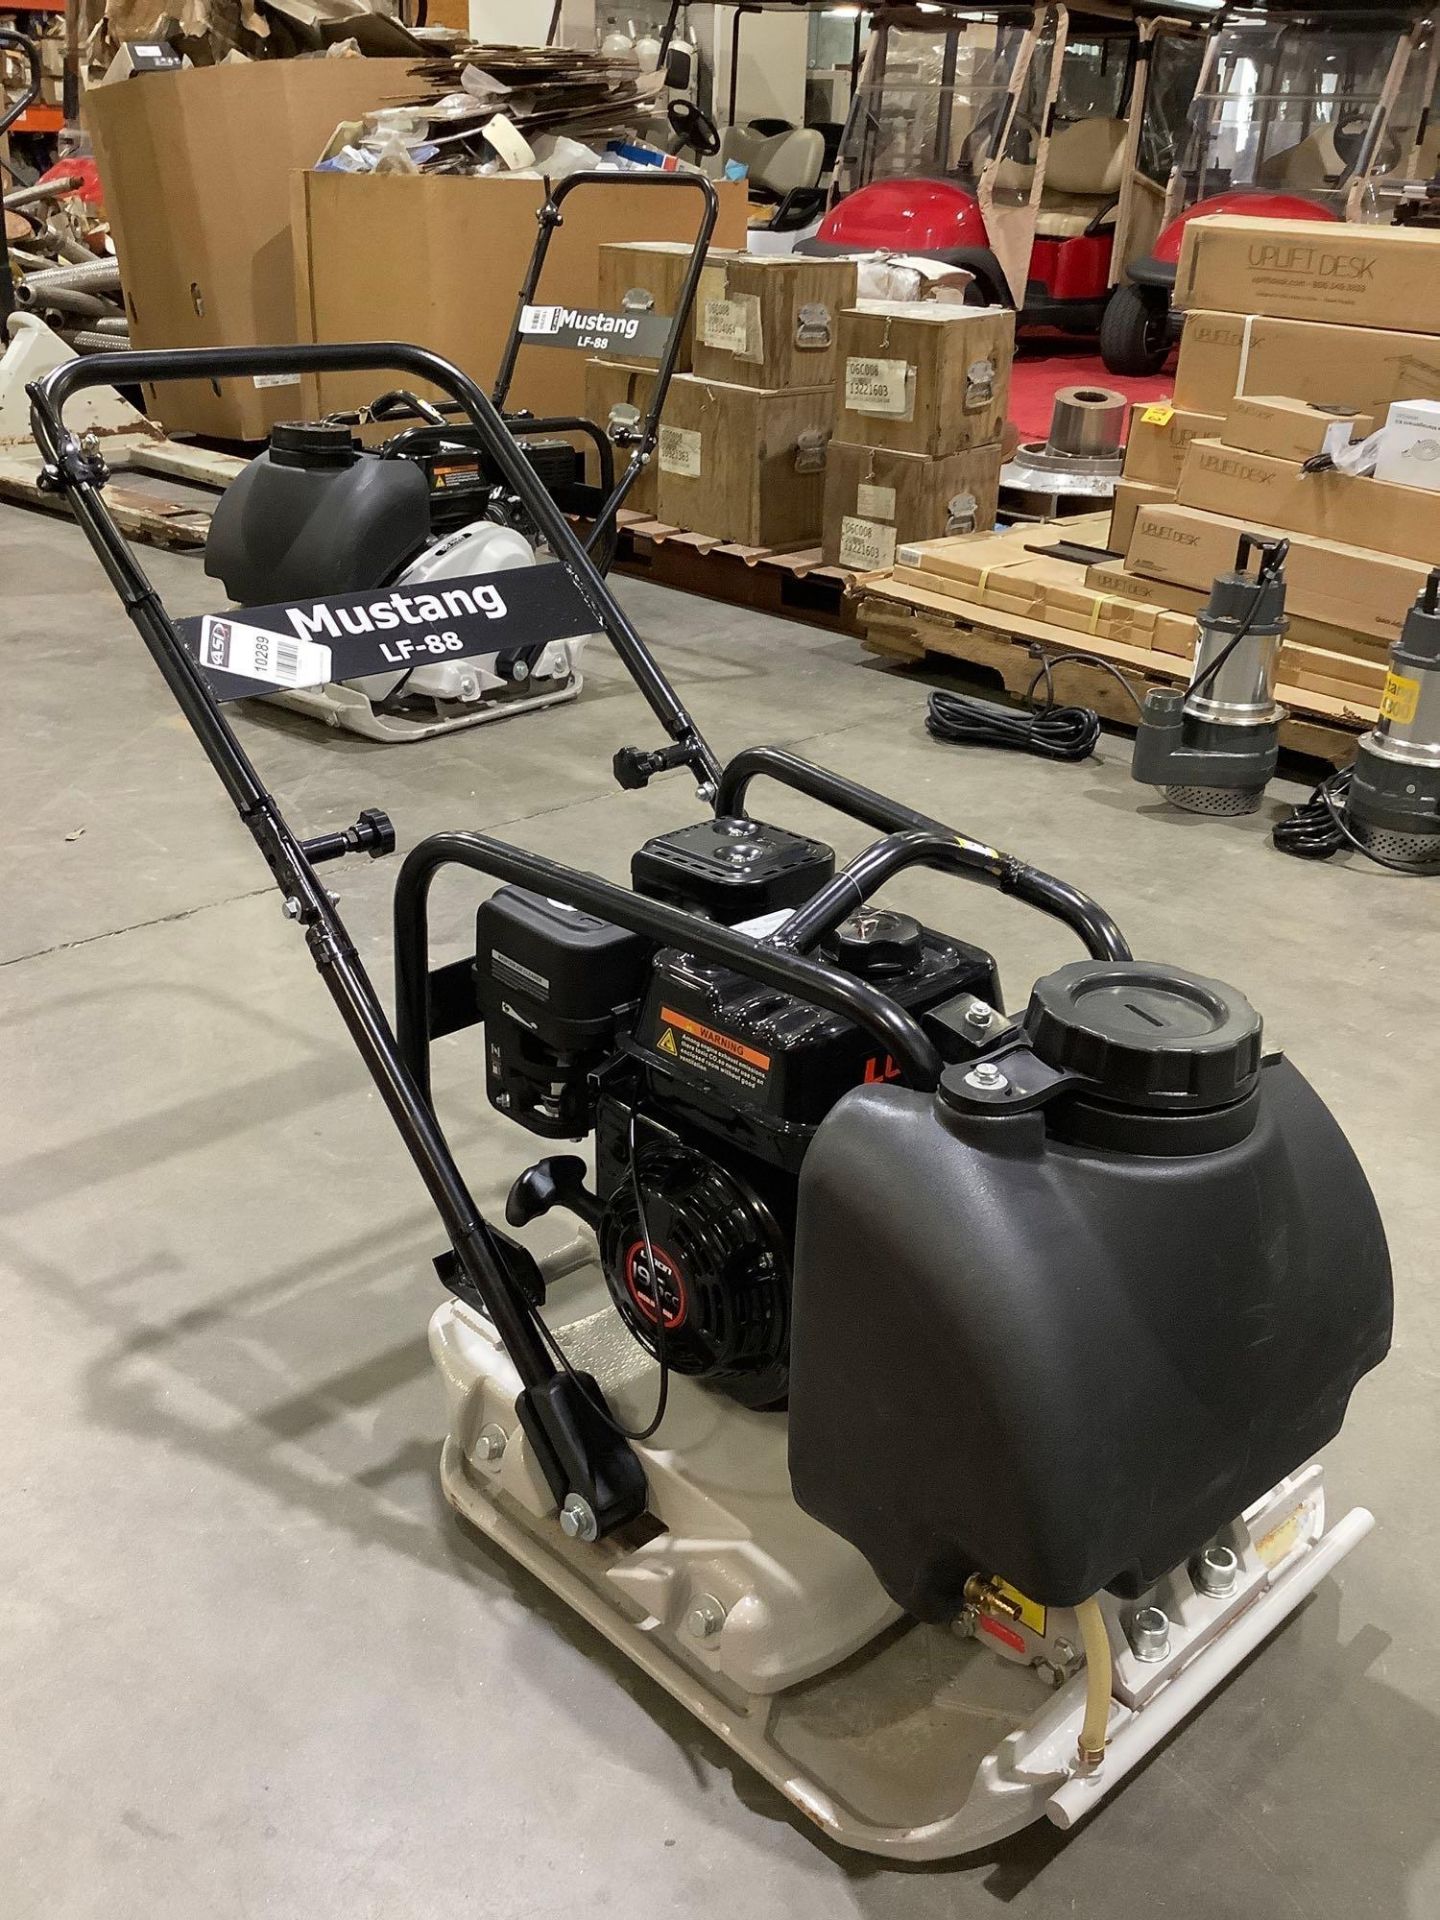 UNUSED MUSTANG LF-88 PLATE COMPACTOR WITH LONCIN 196cc ENGINE, GAS POWERED - Image 9 of 12